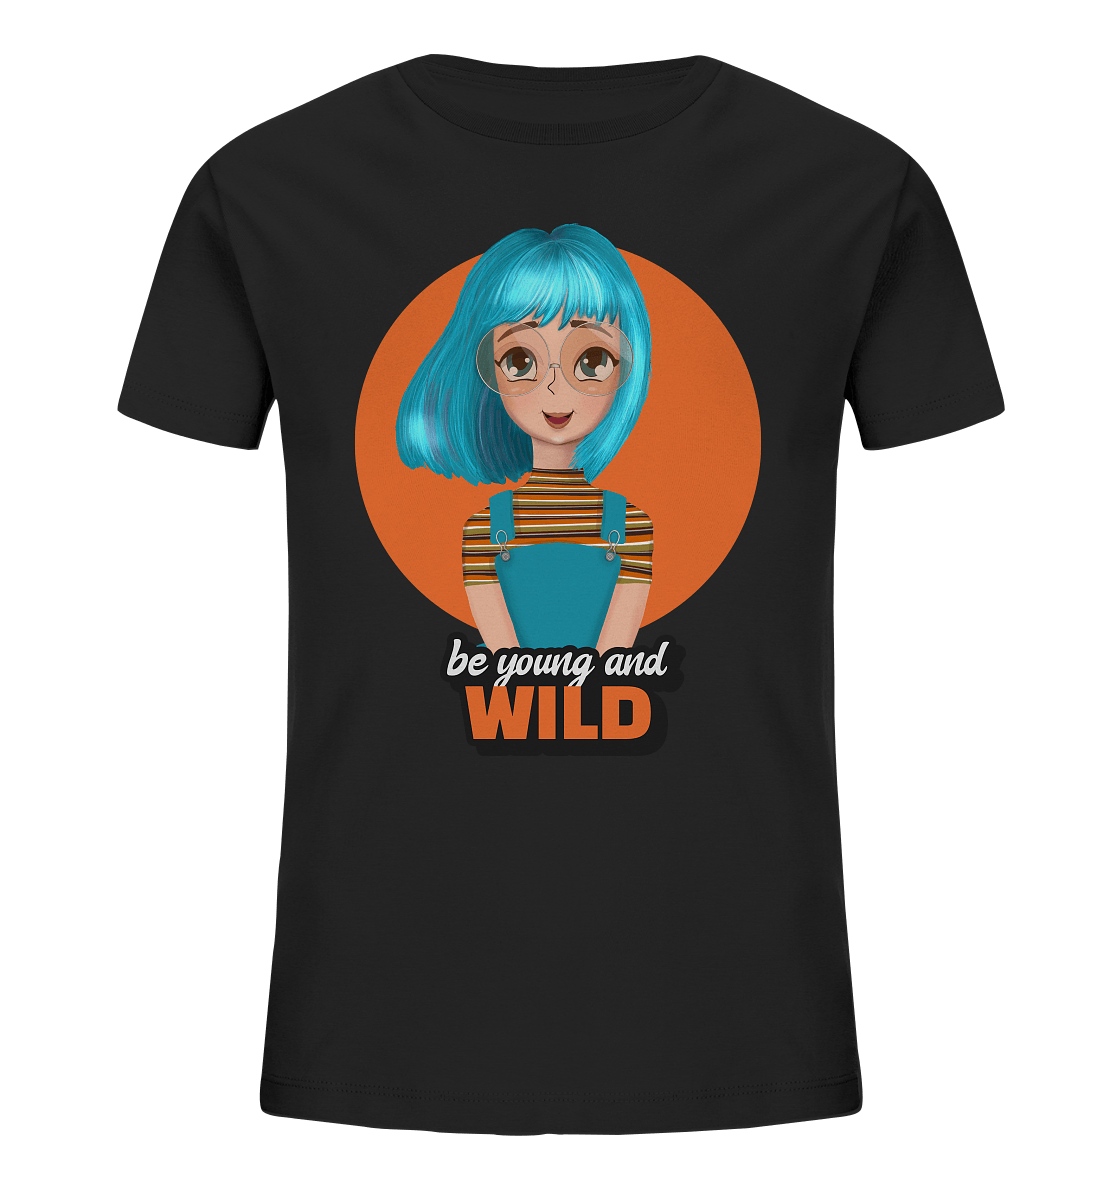 blaue haare cartoon, be young and wild auf t-shirts